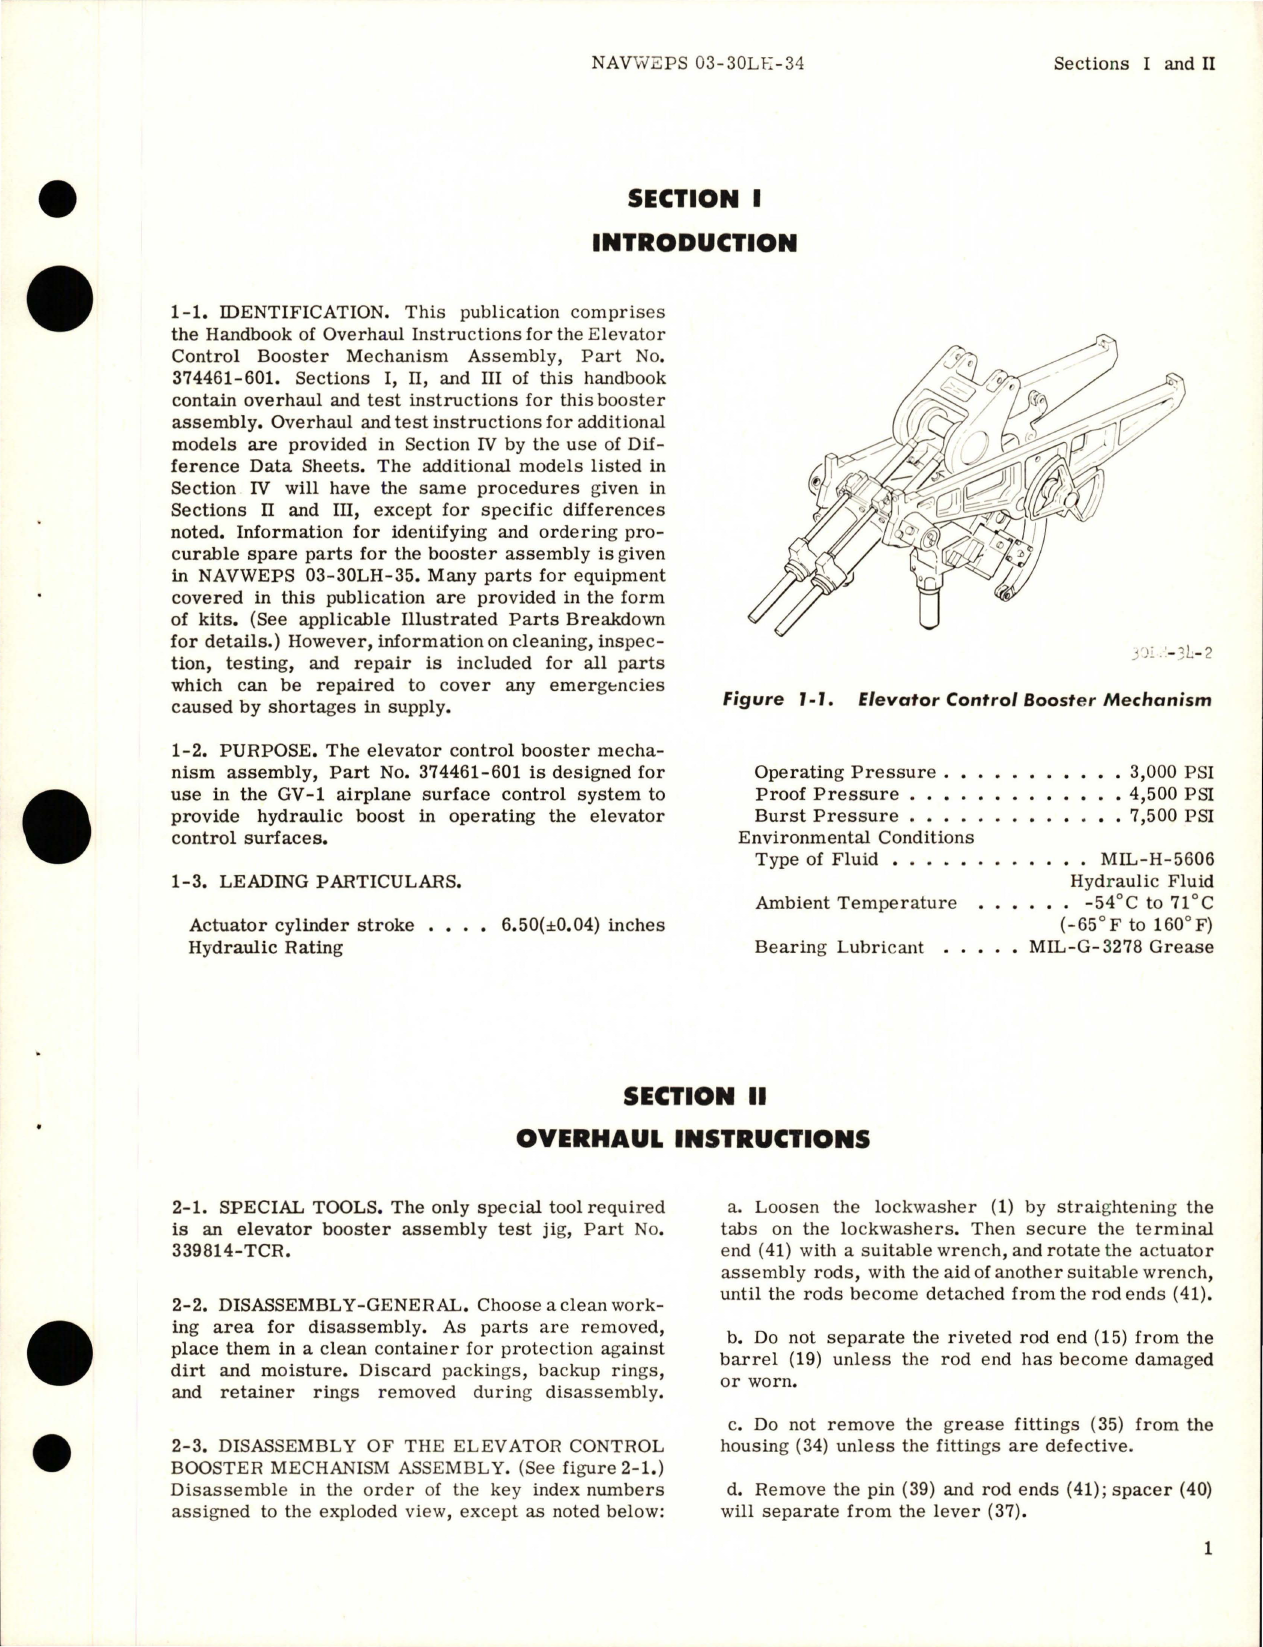 Sample page 5 from AirCorps Library document: Overhaul Instructions for Elevator Control Booster Mechanism Assembly - Parts 374461-601 and 374461-605 